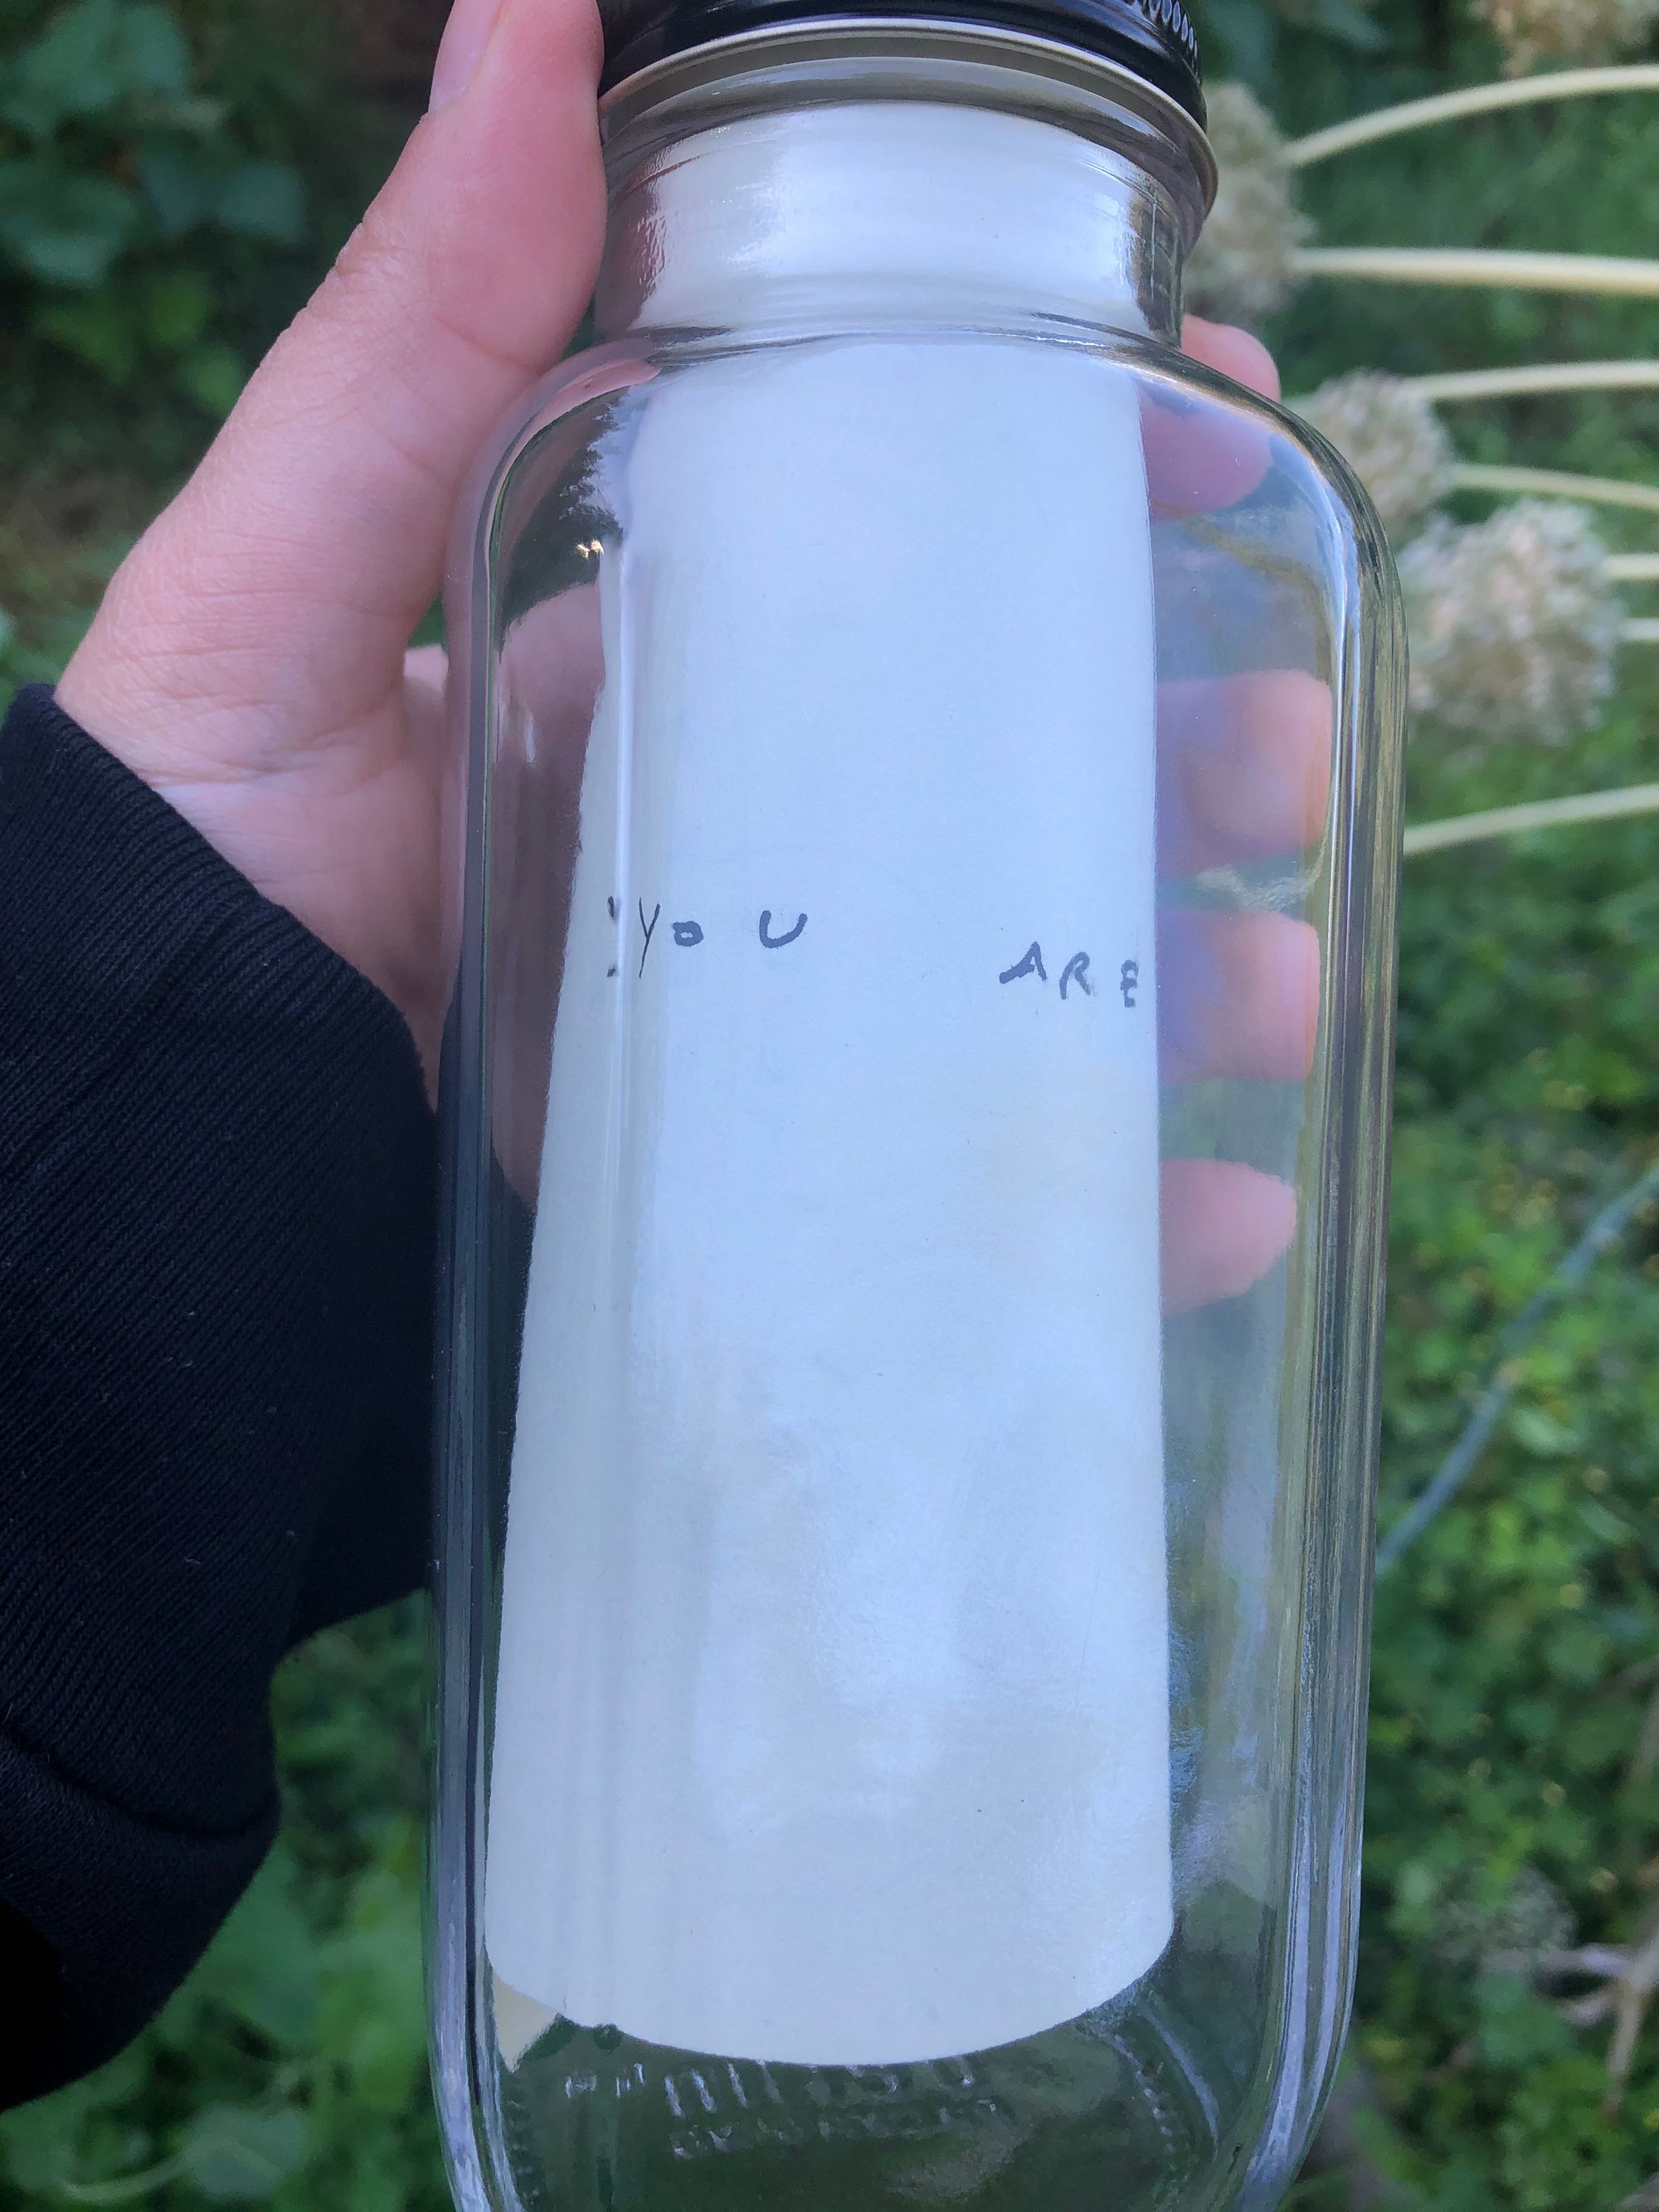 glass bottle, held up in my hand. Inside the bottle is a rolled up piece of paper; in this photo the words visible on it read "You are"